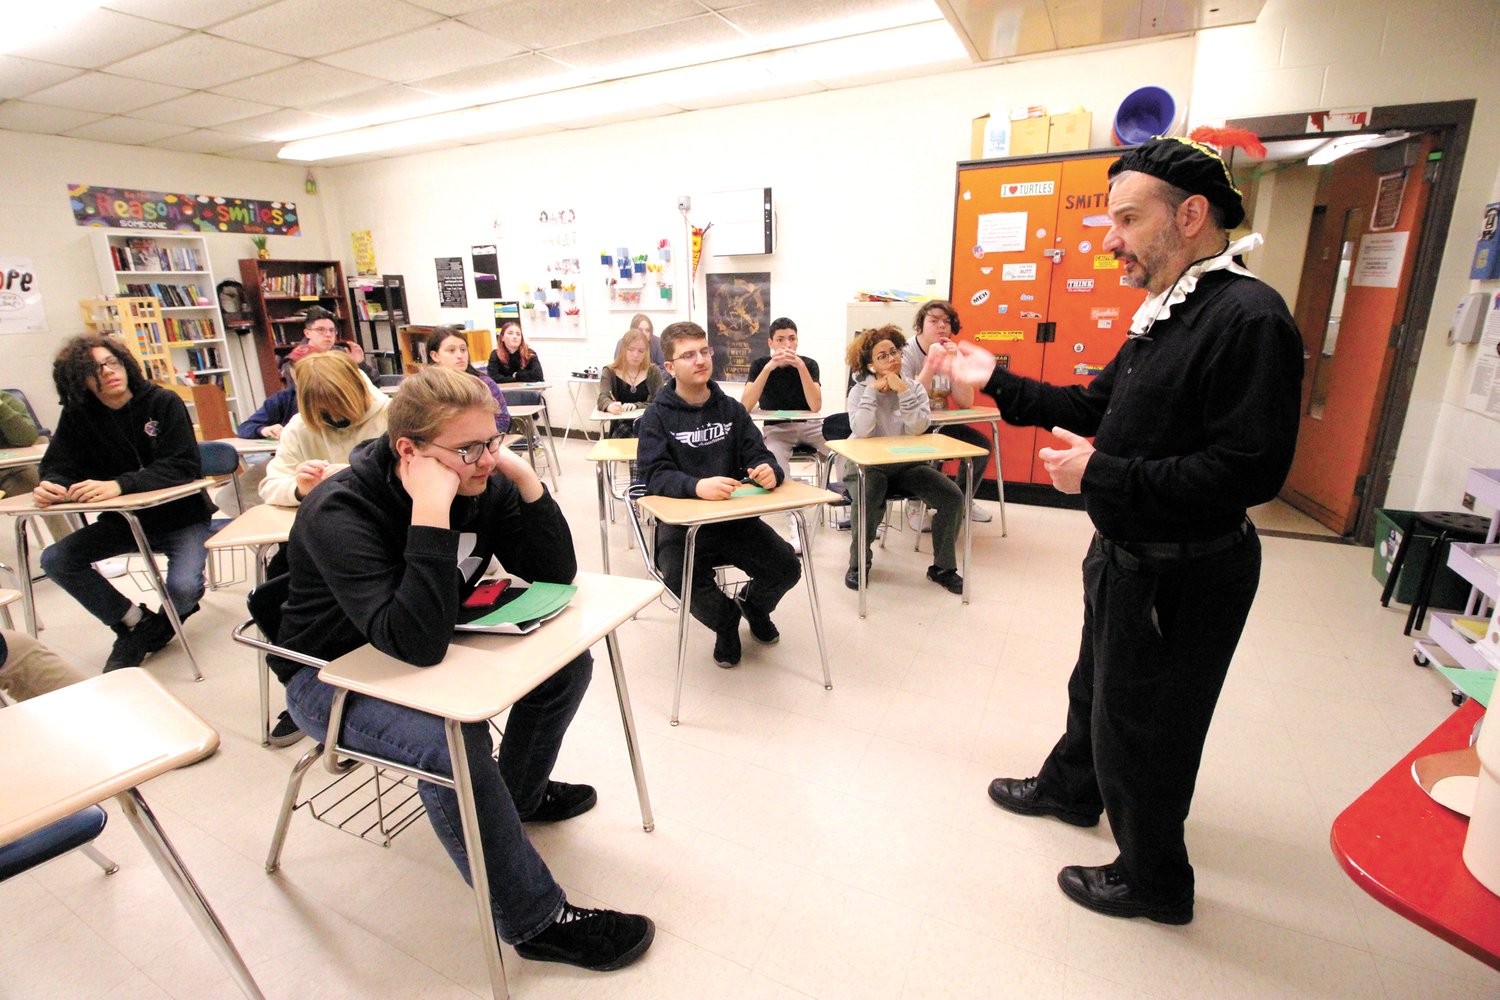 Steve Belanger, who played Shakespeare, and challenged students to stump him.